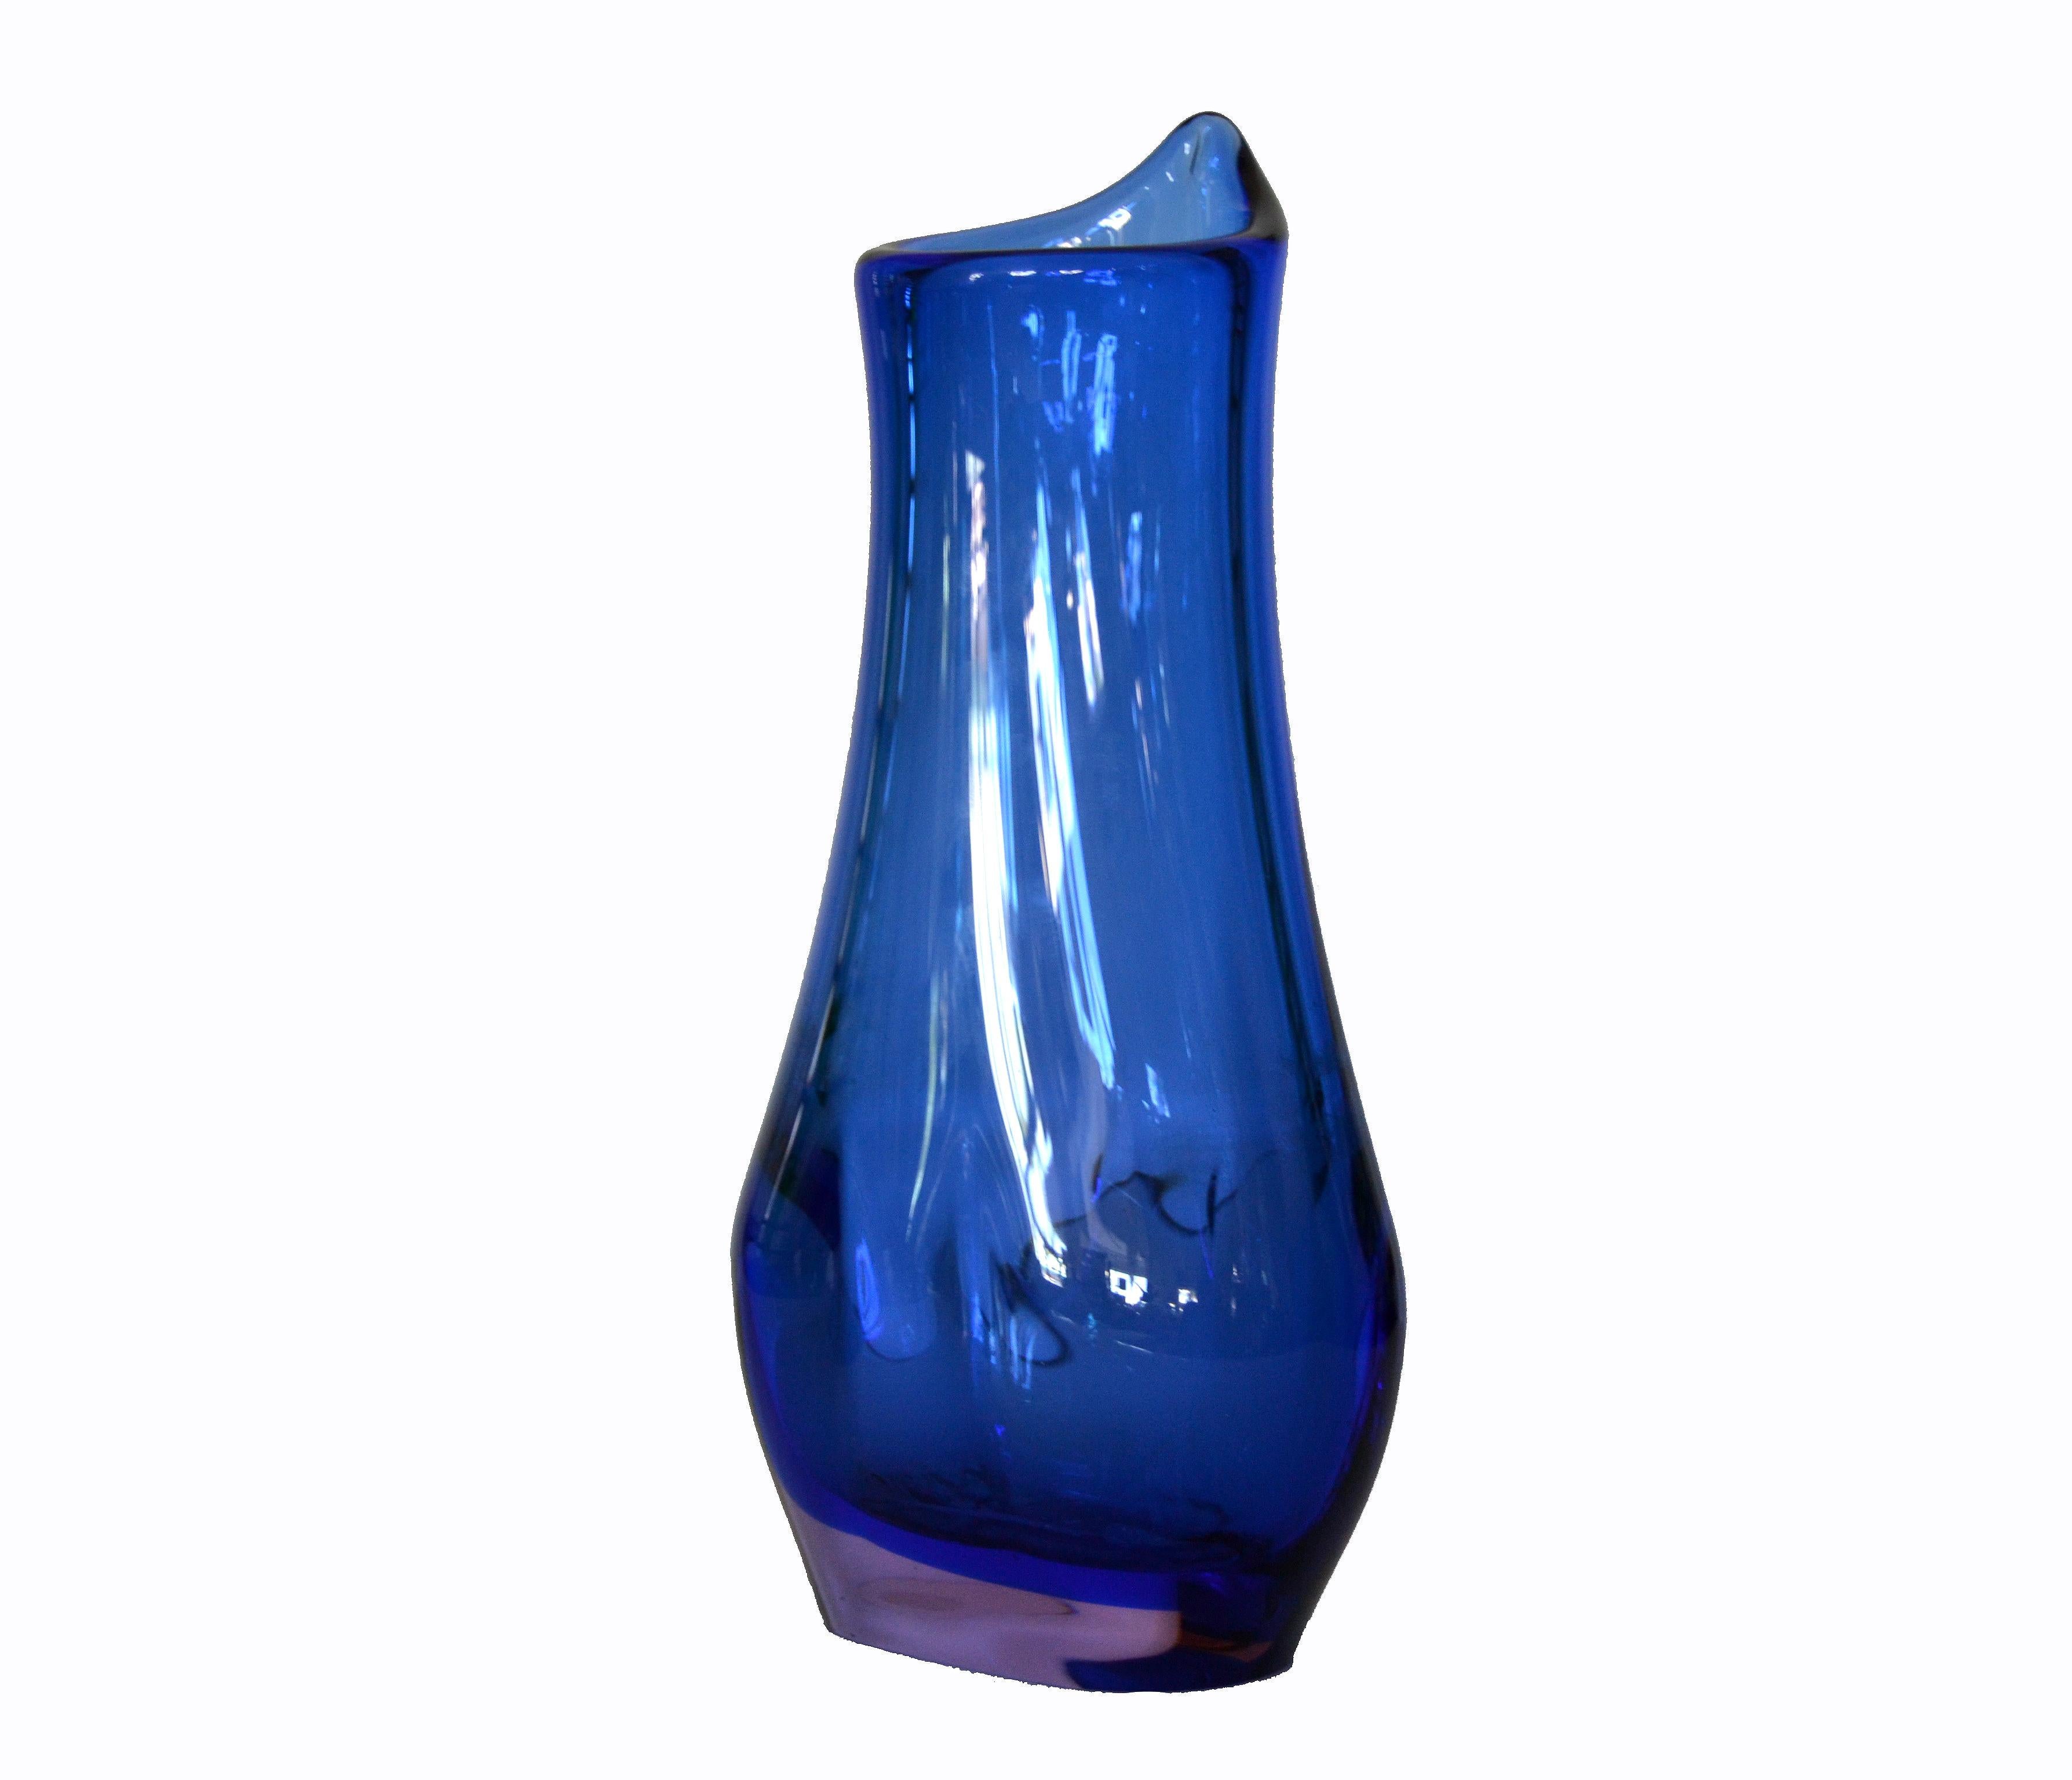 Elegant Mid-Century Modern sculptural hand blown Murano art glass vase in blue, light purple and clear tone.
The vase is heavy.
Simply lovely.